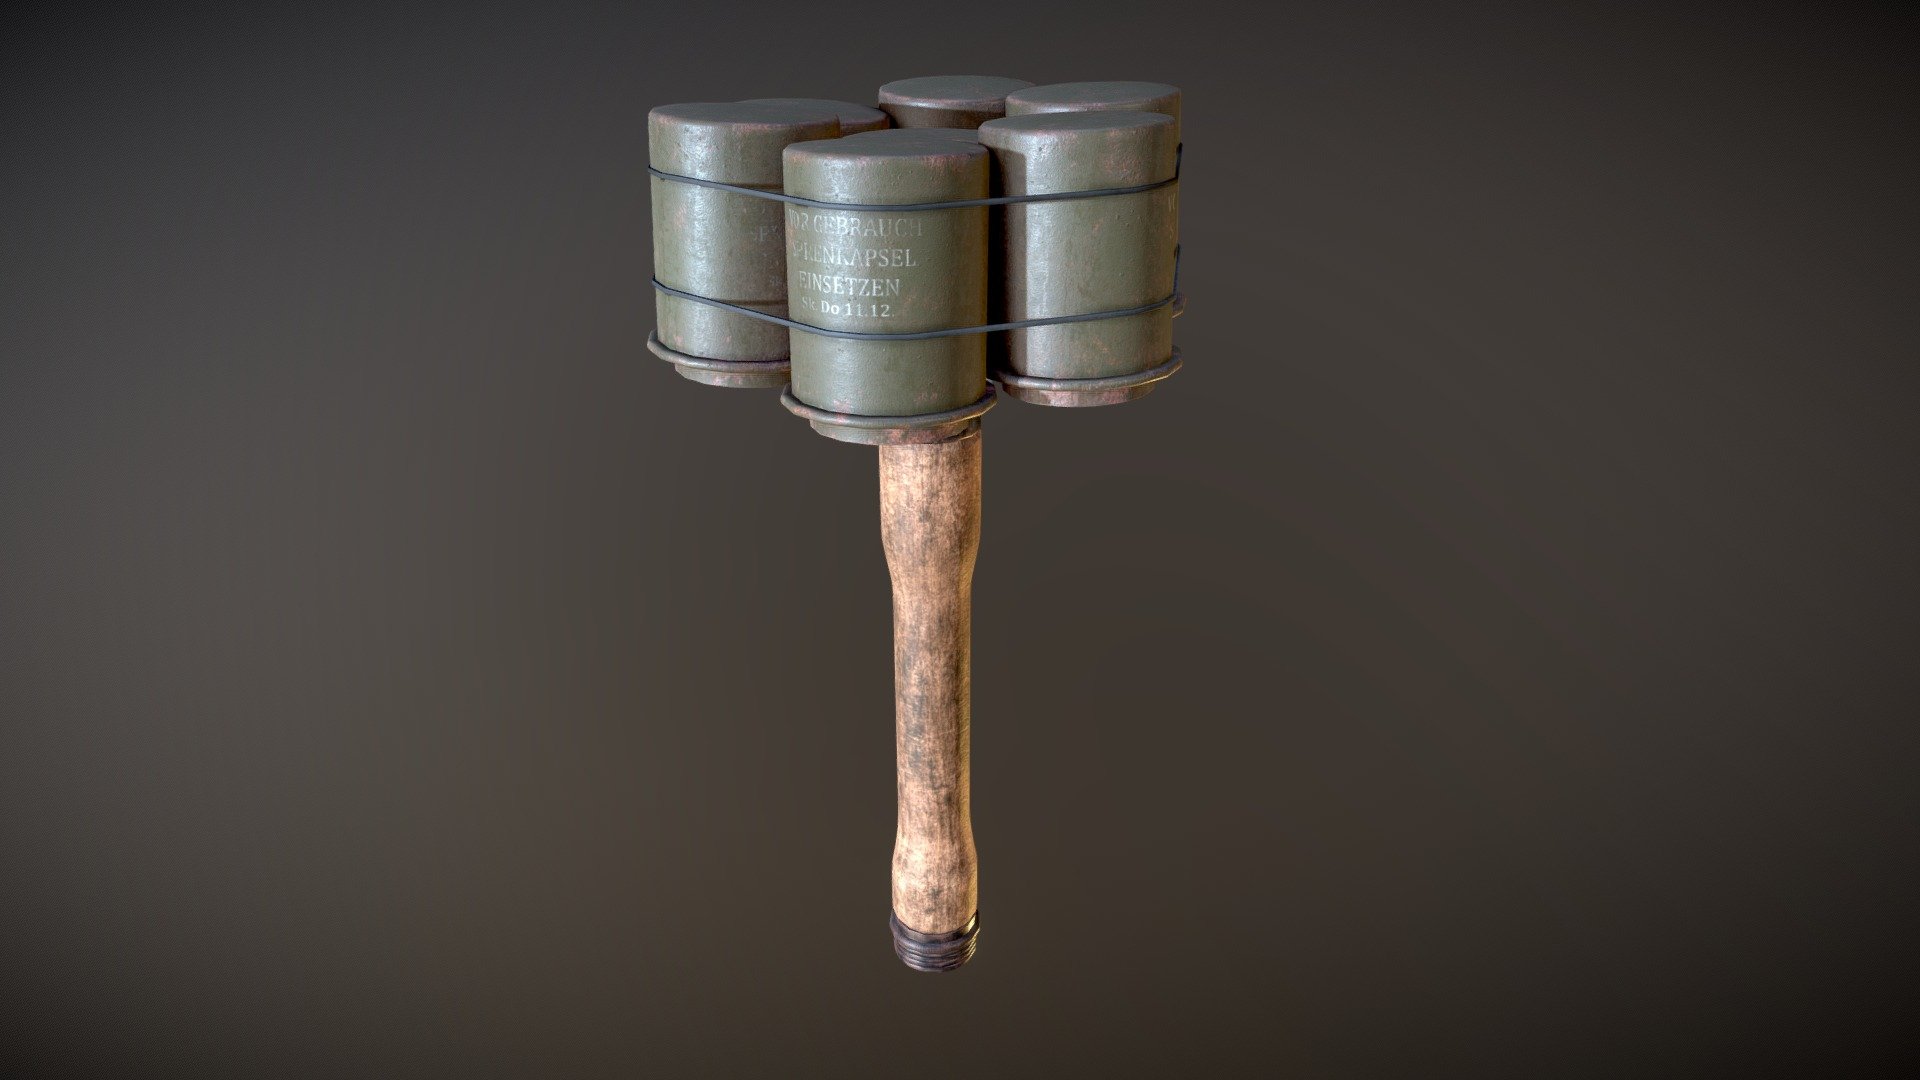 German Nazi M24 Stielhandgrenate Stick Grenade With Anti Tank





100% quad design.




Consists of the stick grenade model and anti tank model to be used together with the stick grenade model.




Both Objects have their own UV map and texture sets, and the Stick grenade can be used completely independently from the AntiTank model.




All Textures created in Substance Painter and exported in 4K PBR formats.




Includes textures for rough/met and gloss/spec workflows




Logically named objects, materials and textures.




Modelled in Blender 2.90.1




Textured in Substance Painter 2020.2.1.




Rendered in Marmoset Toolbag 3.




modelled to real world scales (Metric).




Fully and efficiently UV unwrapped.




Game ready.




Subdivision ready as shown in renders.




Tested in Marmoset Viewer, Marmoset Toolbag, EEVEE and Cycles.



Formats included

.Blend - Native
.FBX
.OBJ
.DAE

Poly Counts combined




Face count:       5246

Vert count:       5490

Edges:        10715

Triangulated count:   10492
 - Nazi M24 Steilhandgrenate Stick Grenade - Buy Royalty Free 3D model by PBR3D 3d model